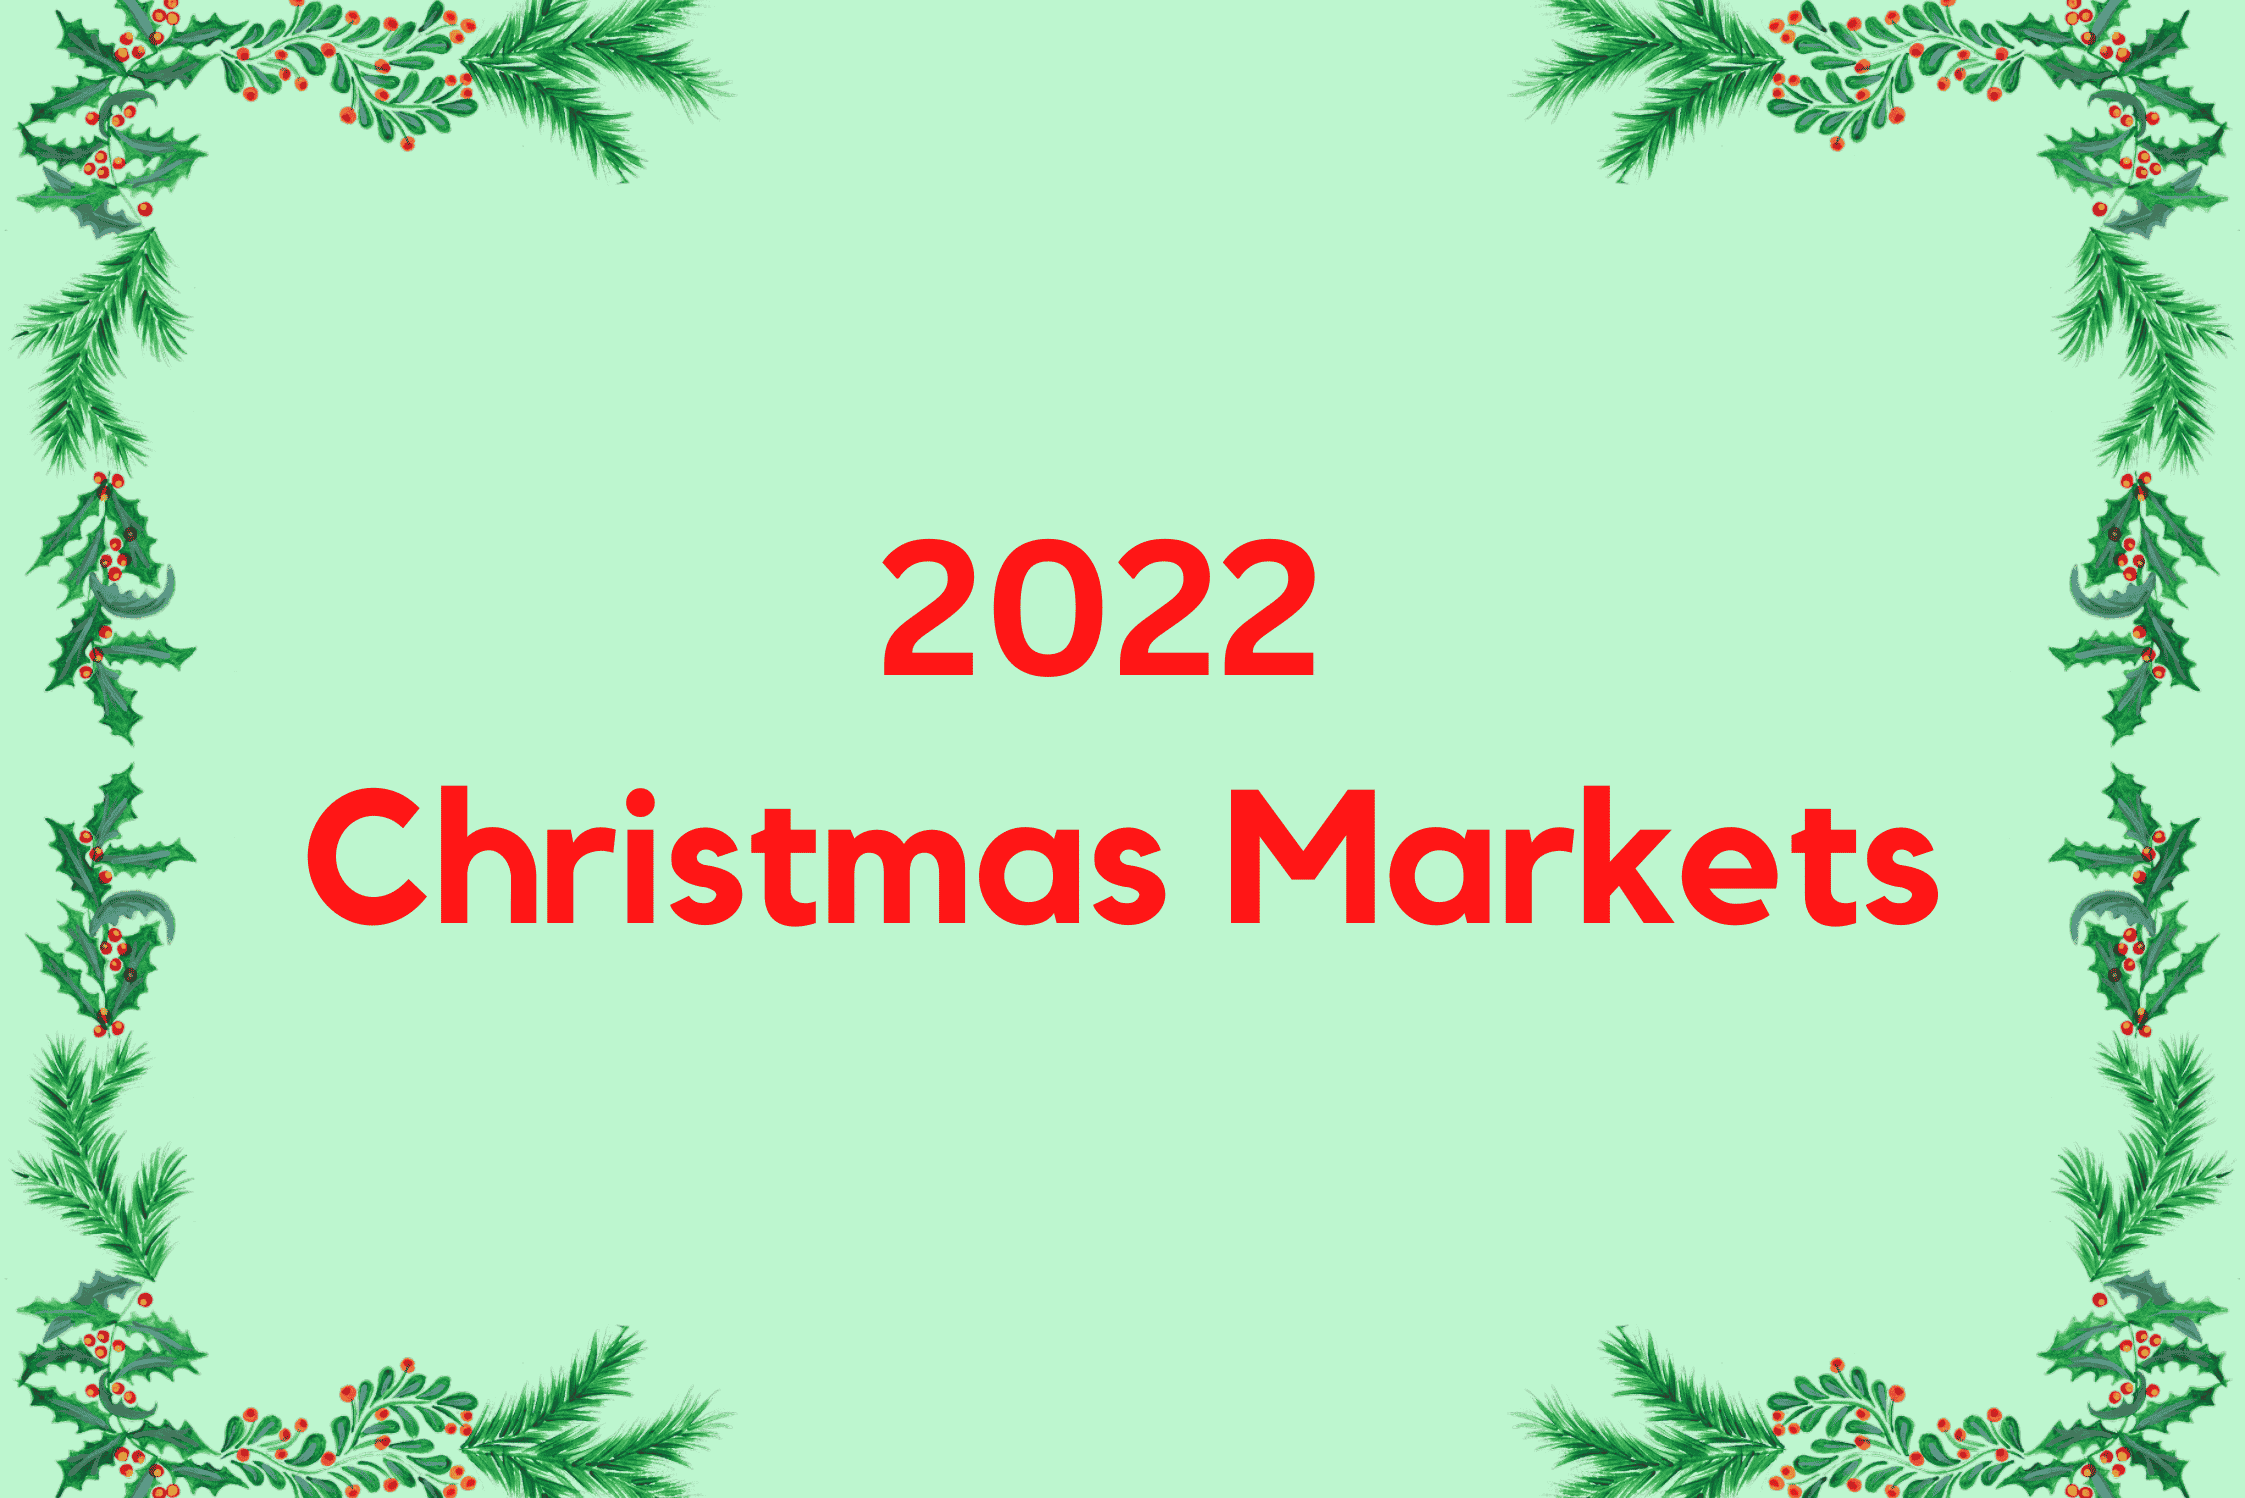 Text reads '2022 Christmas Markets' with a border of holly.